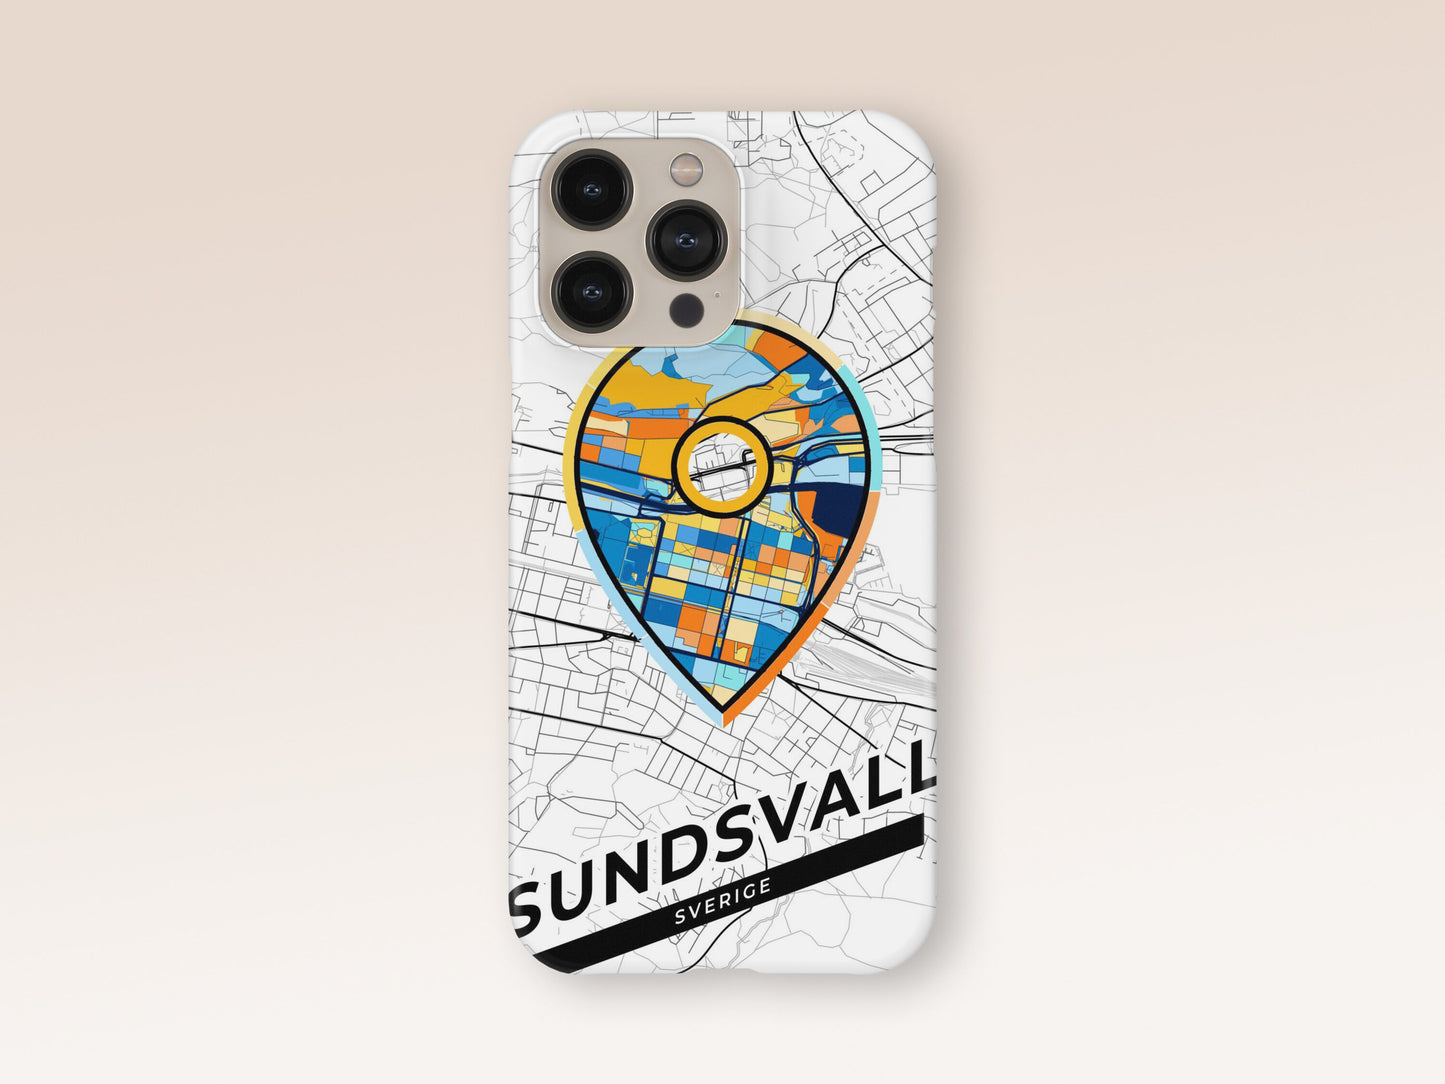 Sundsvall Sweden slim phone case with colorful icon 1